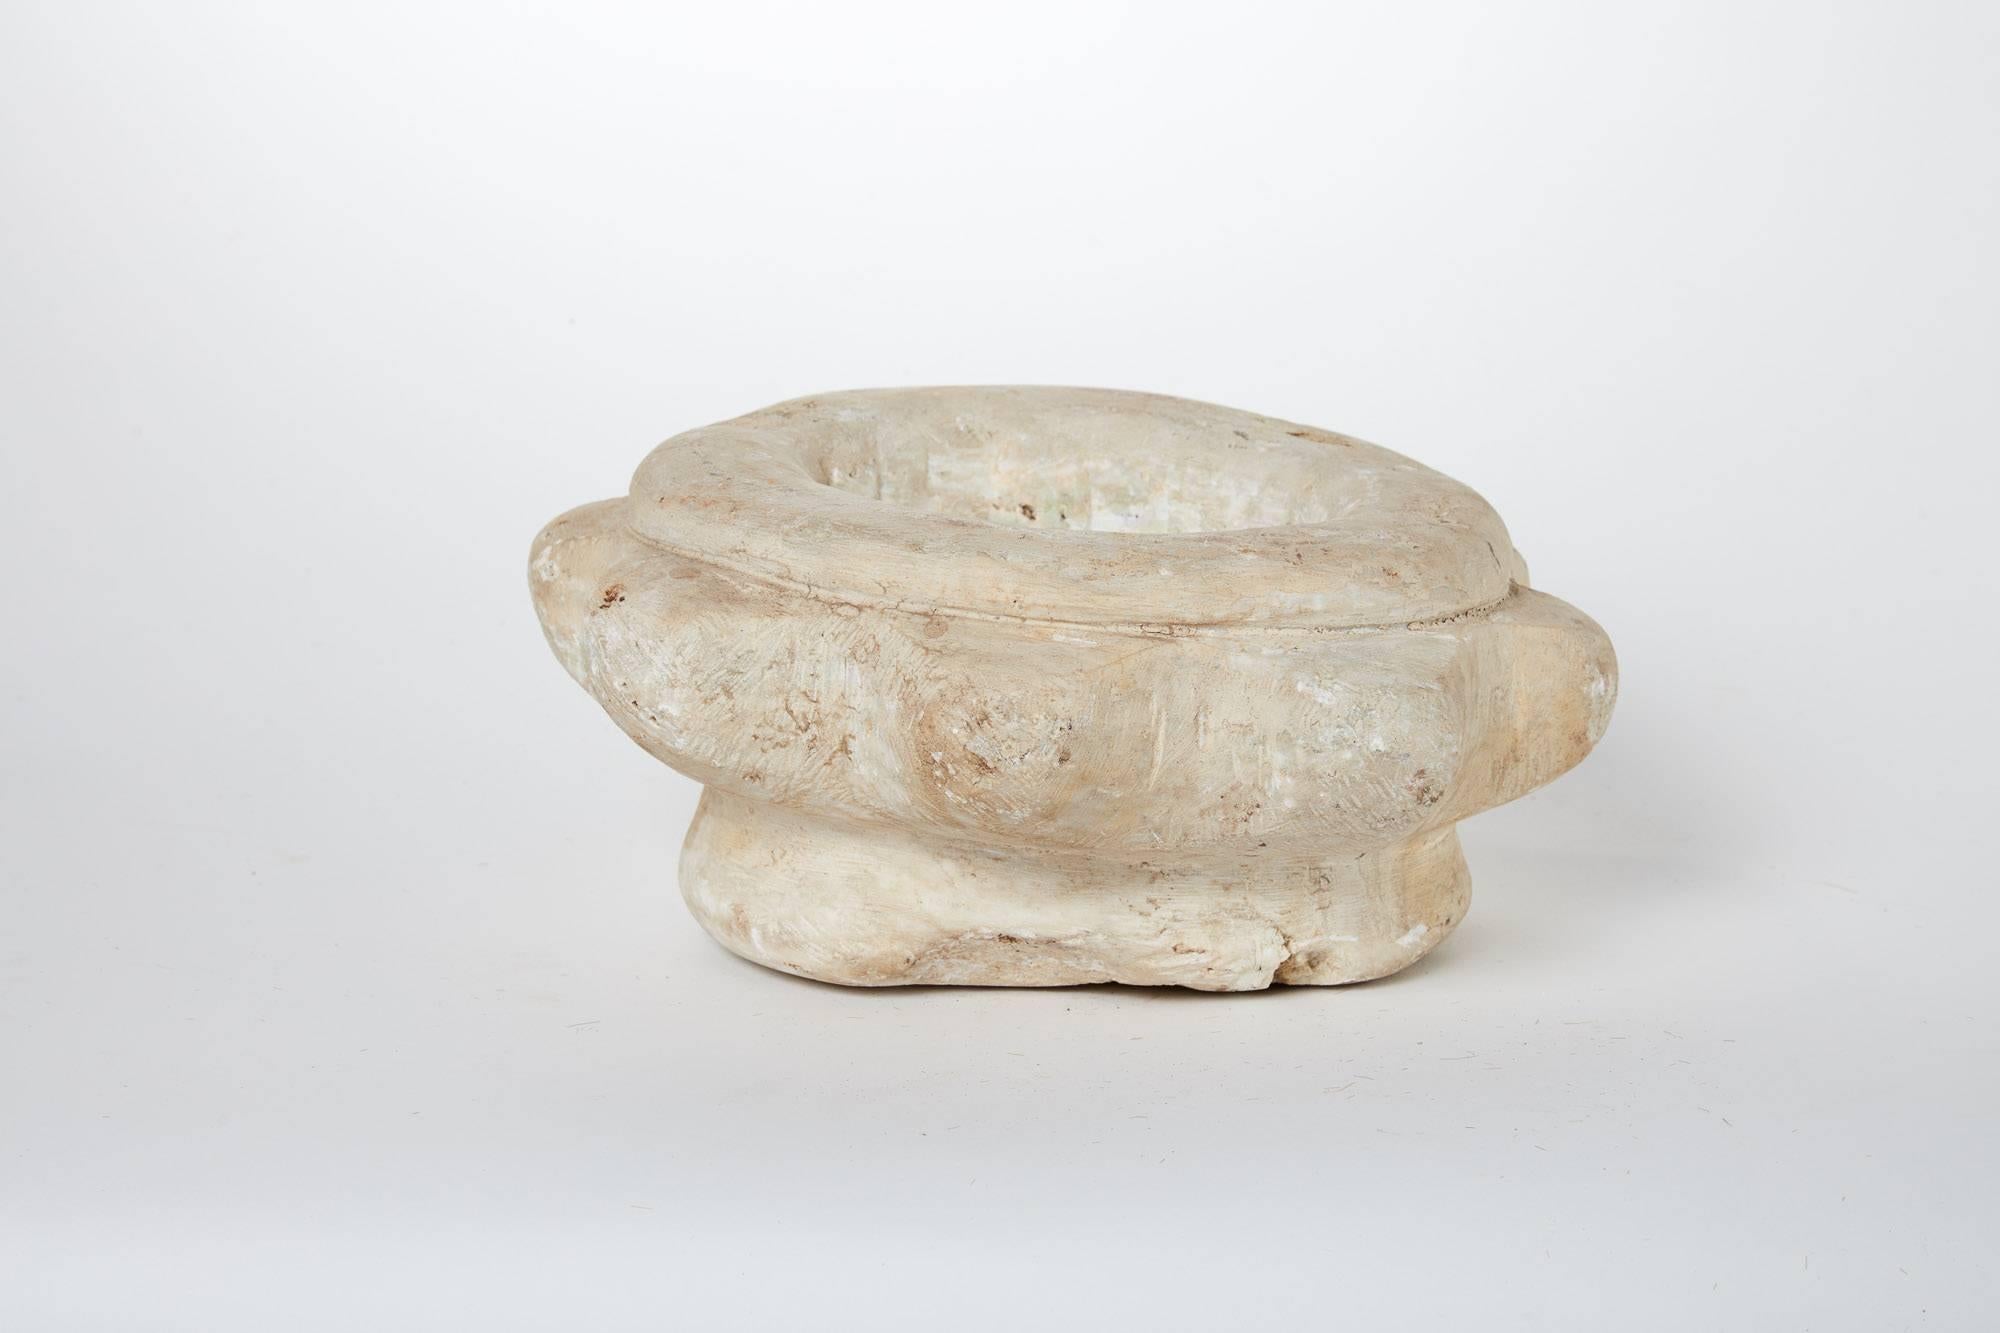 Early 20th century marble vessel pair from Turkey. Its comprised of a larger and smaller floral shaped, hand chiseled stone vessels. 

Small: 9.25 diameter x 4 height
Large: 10.75 diameter x 4.5 height.